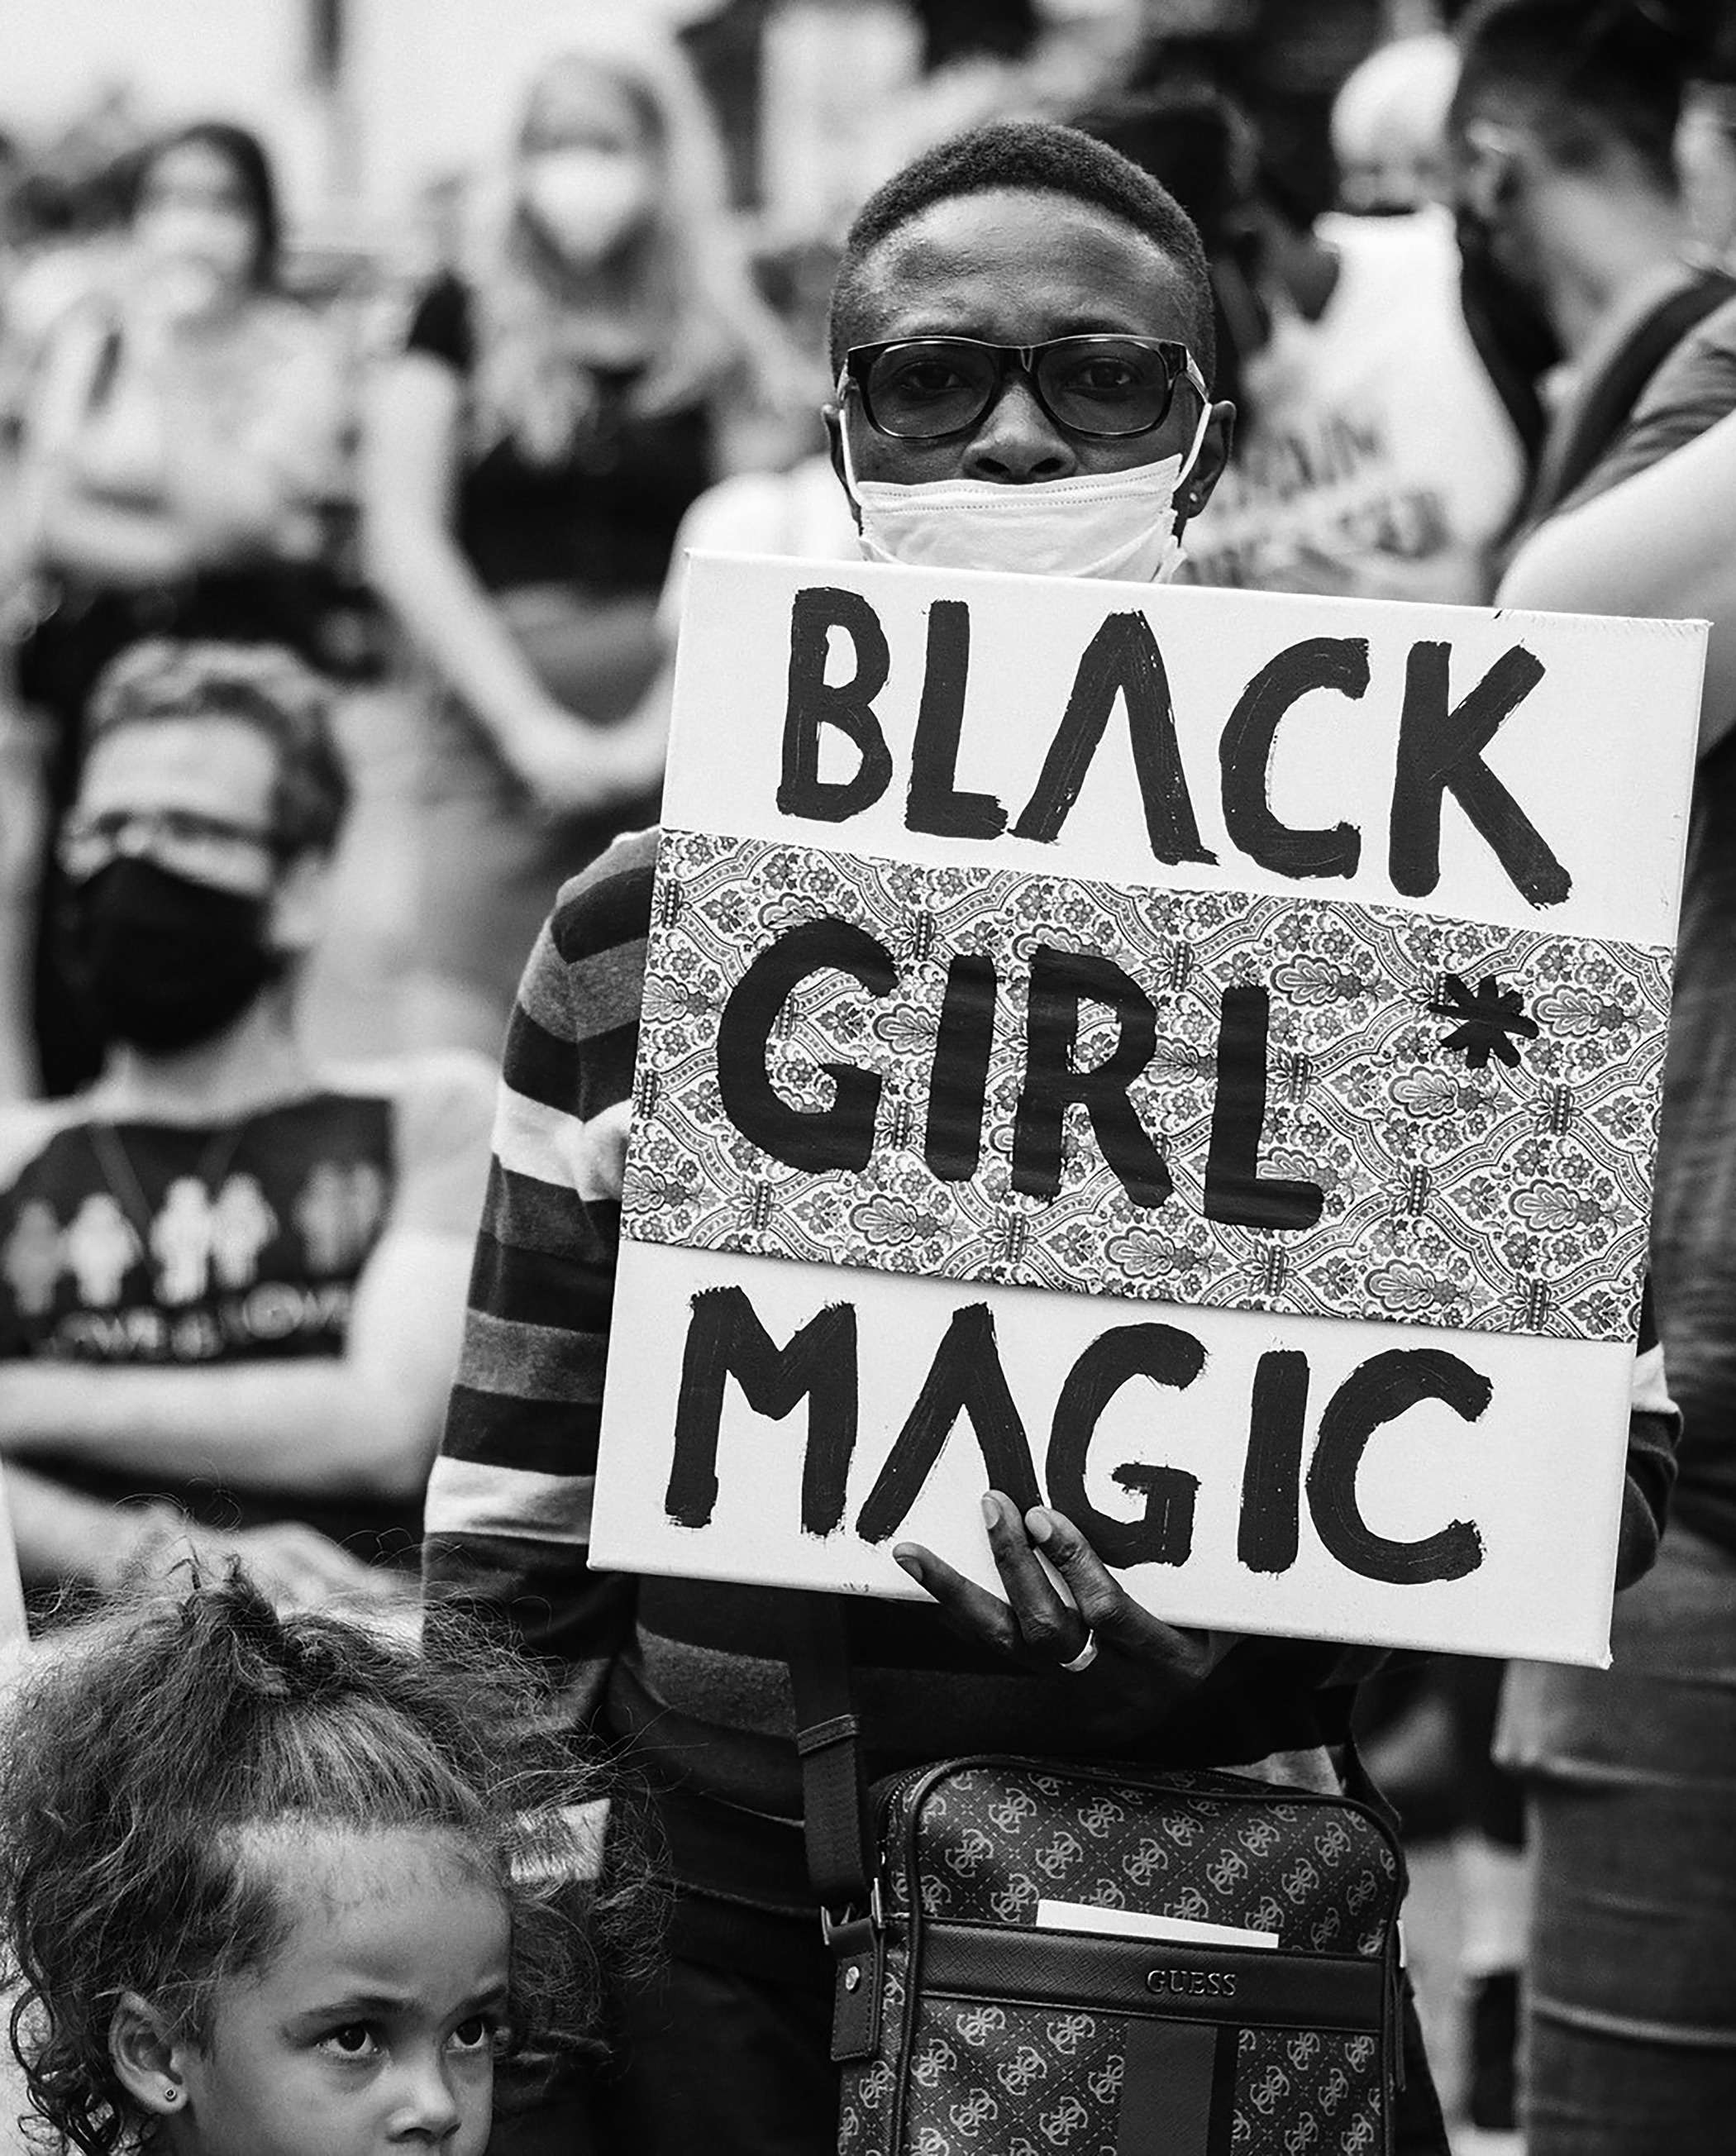 Woman with her child at Black Lives Matter Protest credit Ivan Radic